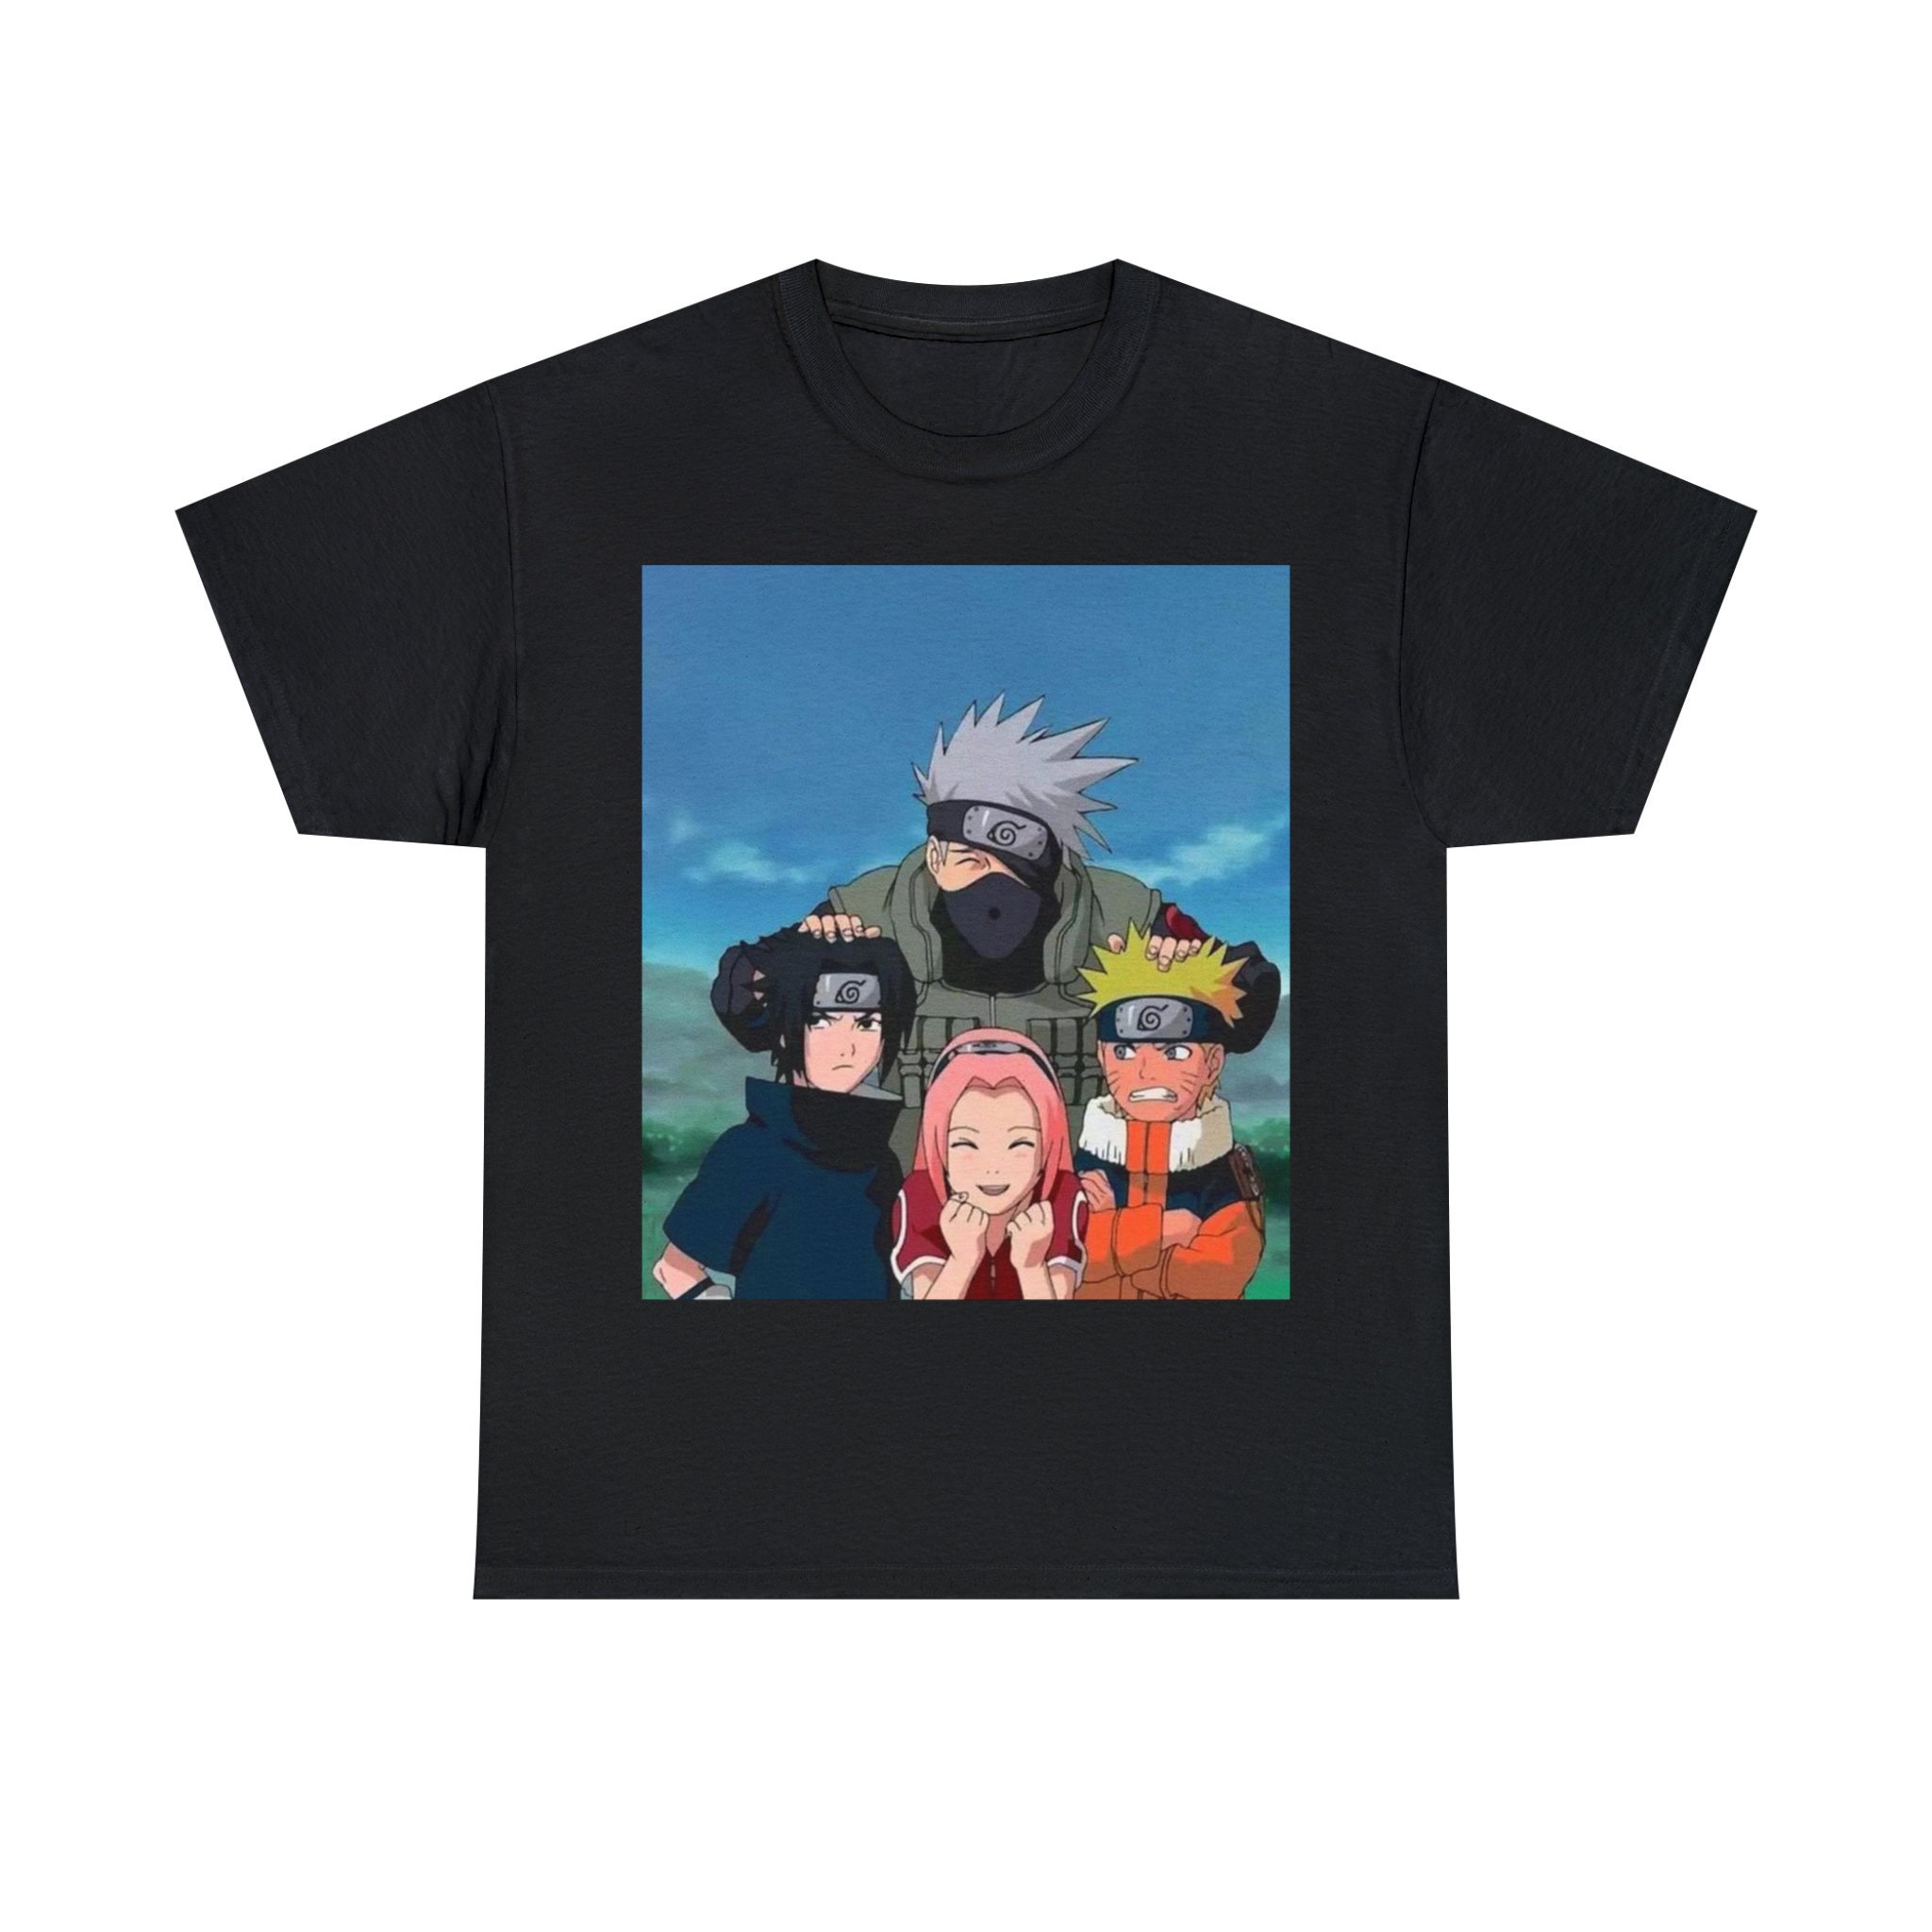 Anime Shirts  Graphic Tees  Hot Topic